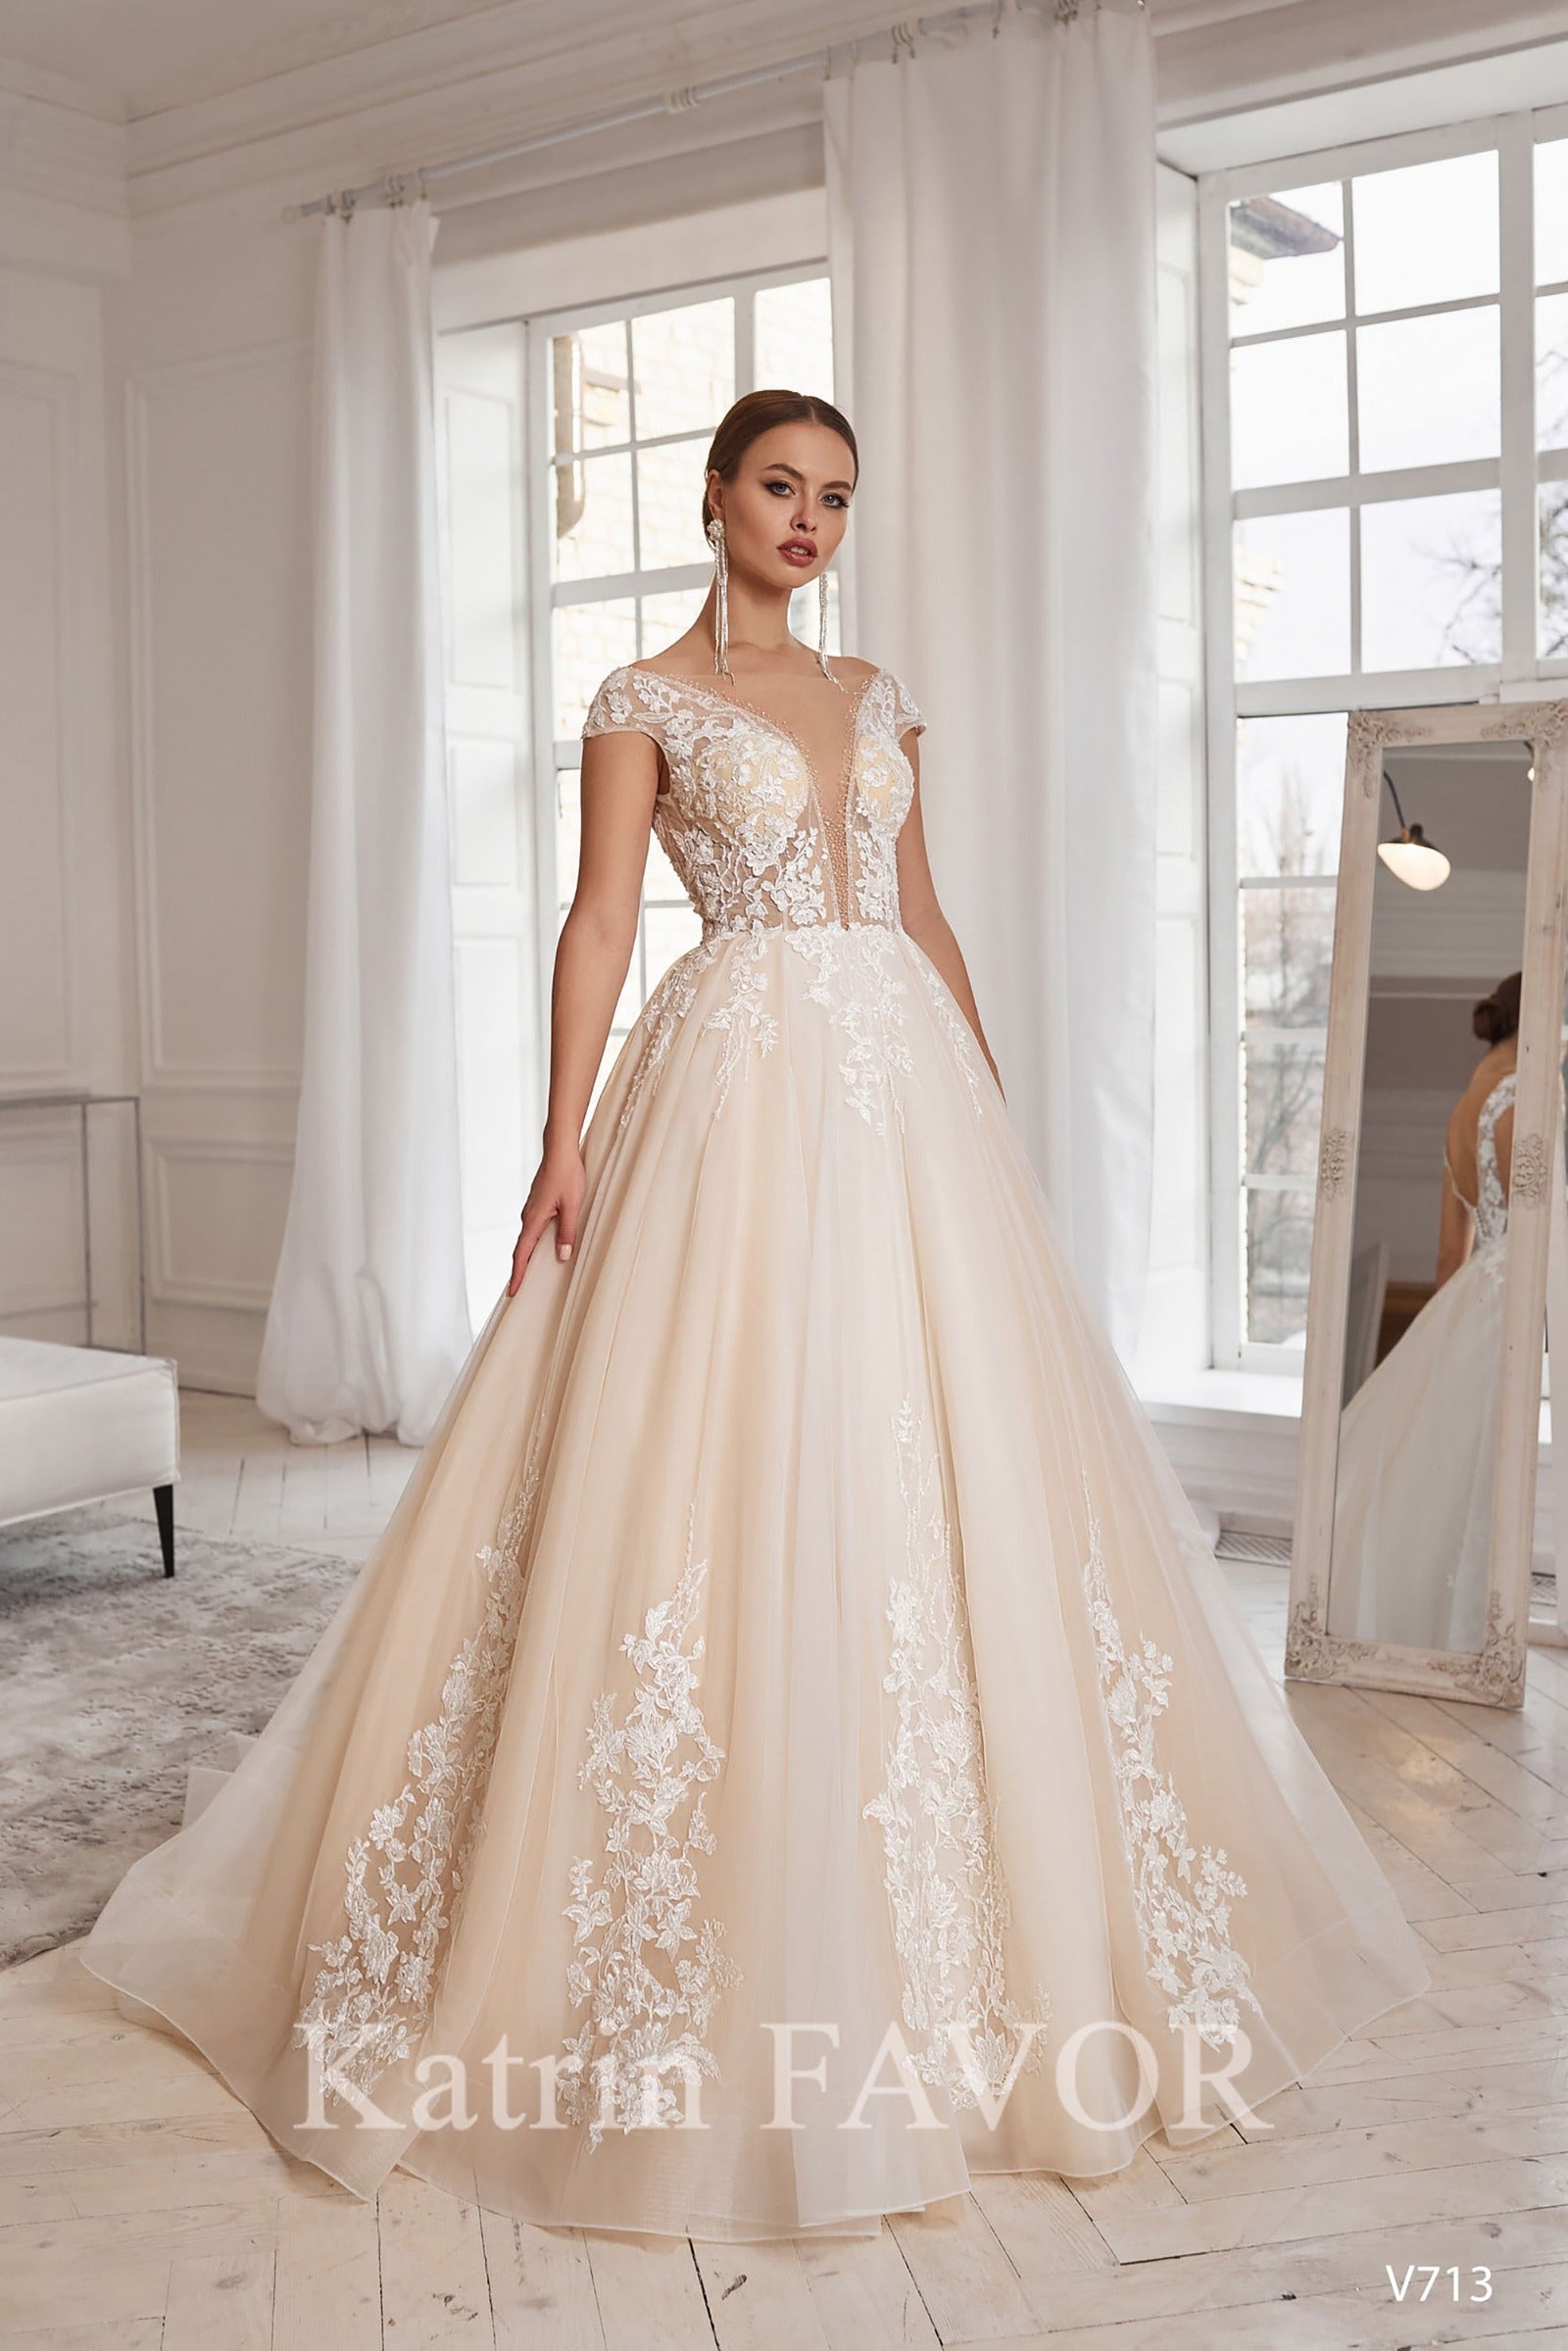 Blush tulle embroidered wedding gown